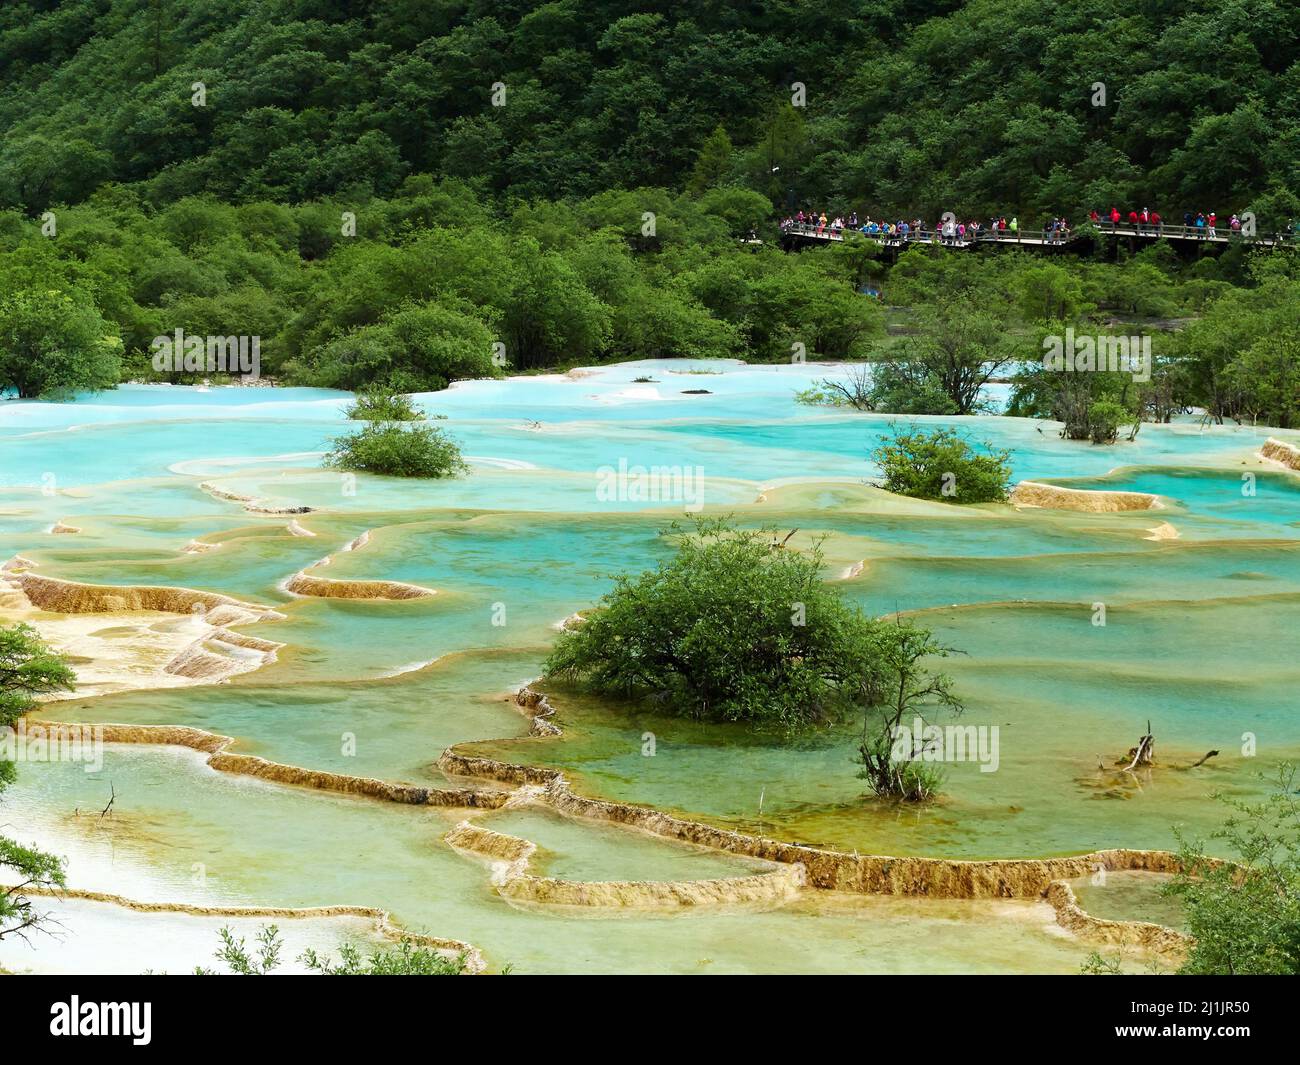 A natural blue pool in Huanglong national park with lush green forests and tourists on a bridge in the background in Sichuan, China Stock Photo